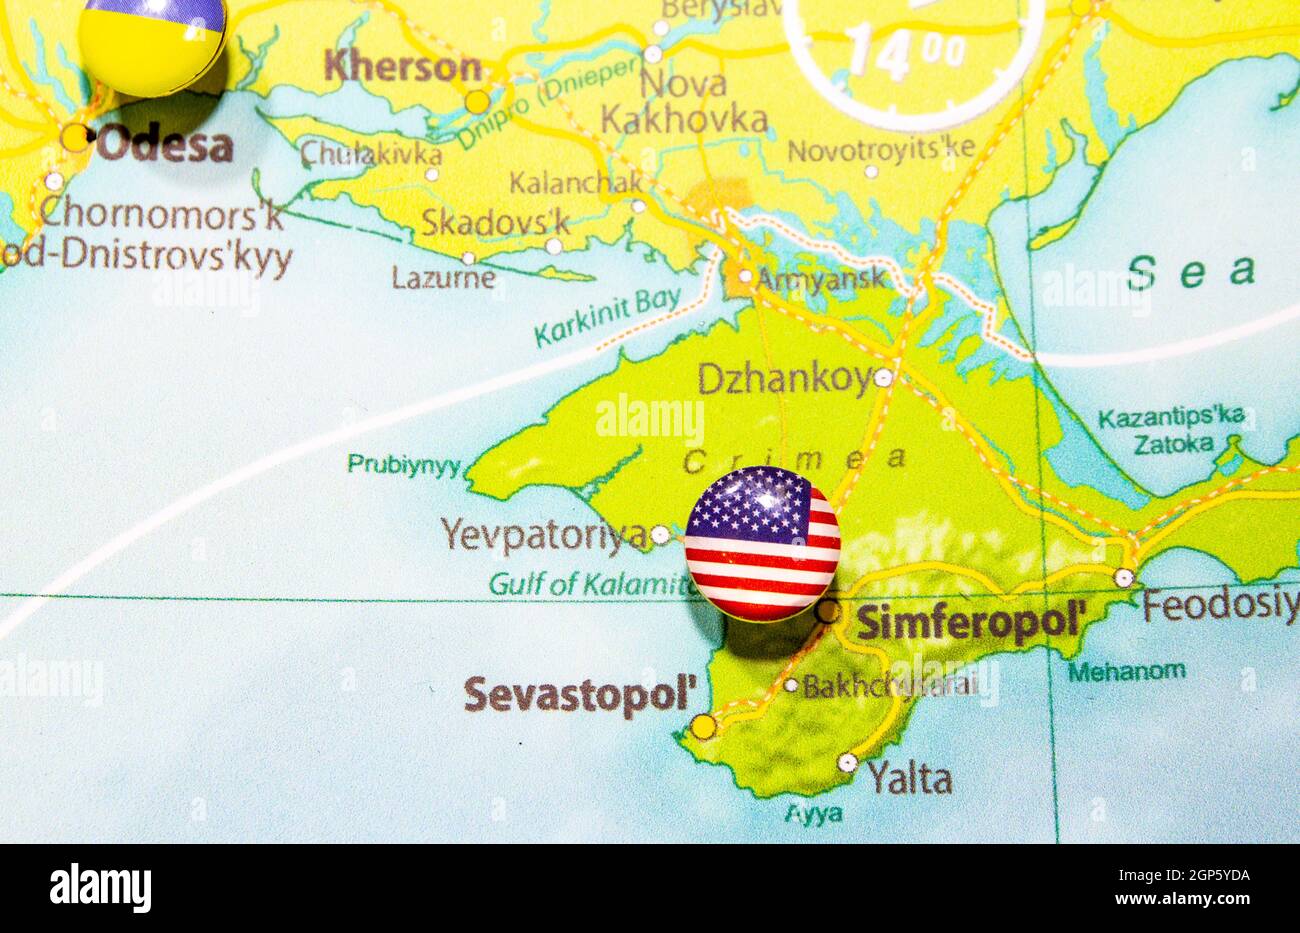 Close-up view of Crimea on a geographical globe with Sevastopol, Simferopol city. Map shows peninsula with pin turkish Flag. Focus point on pushpin ar Stock Photo